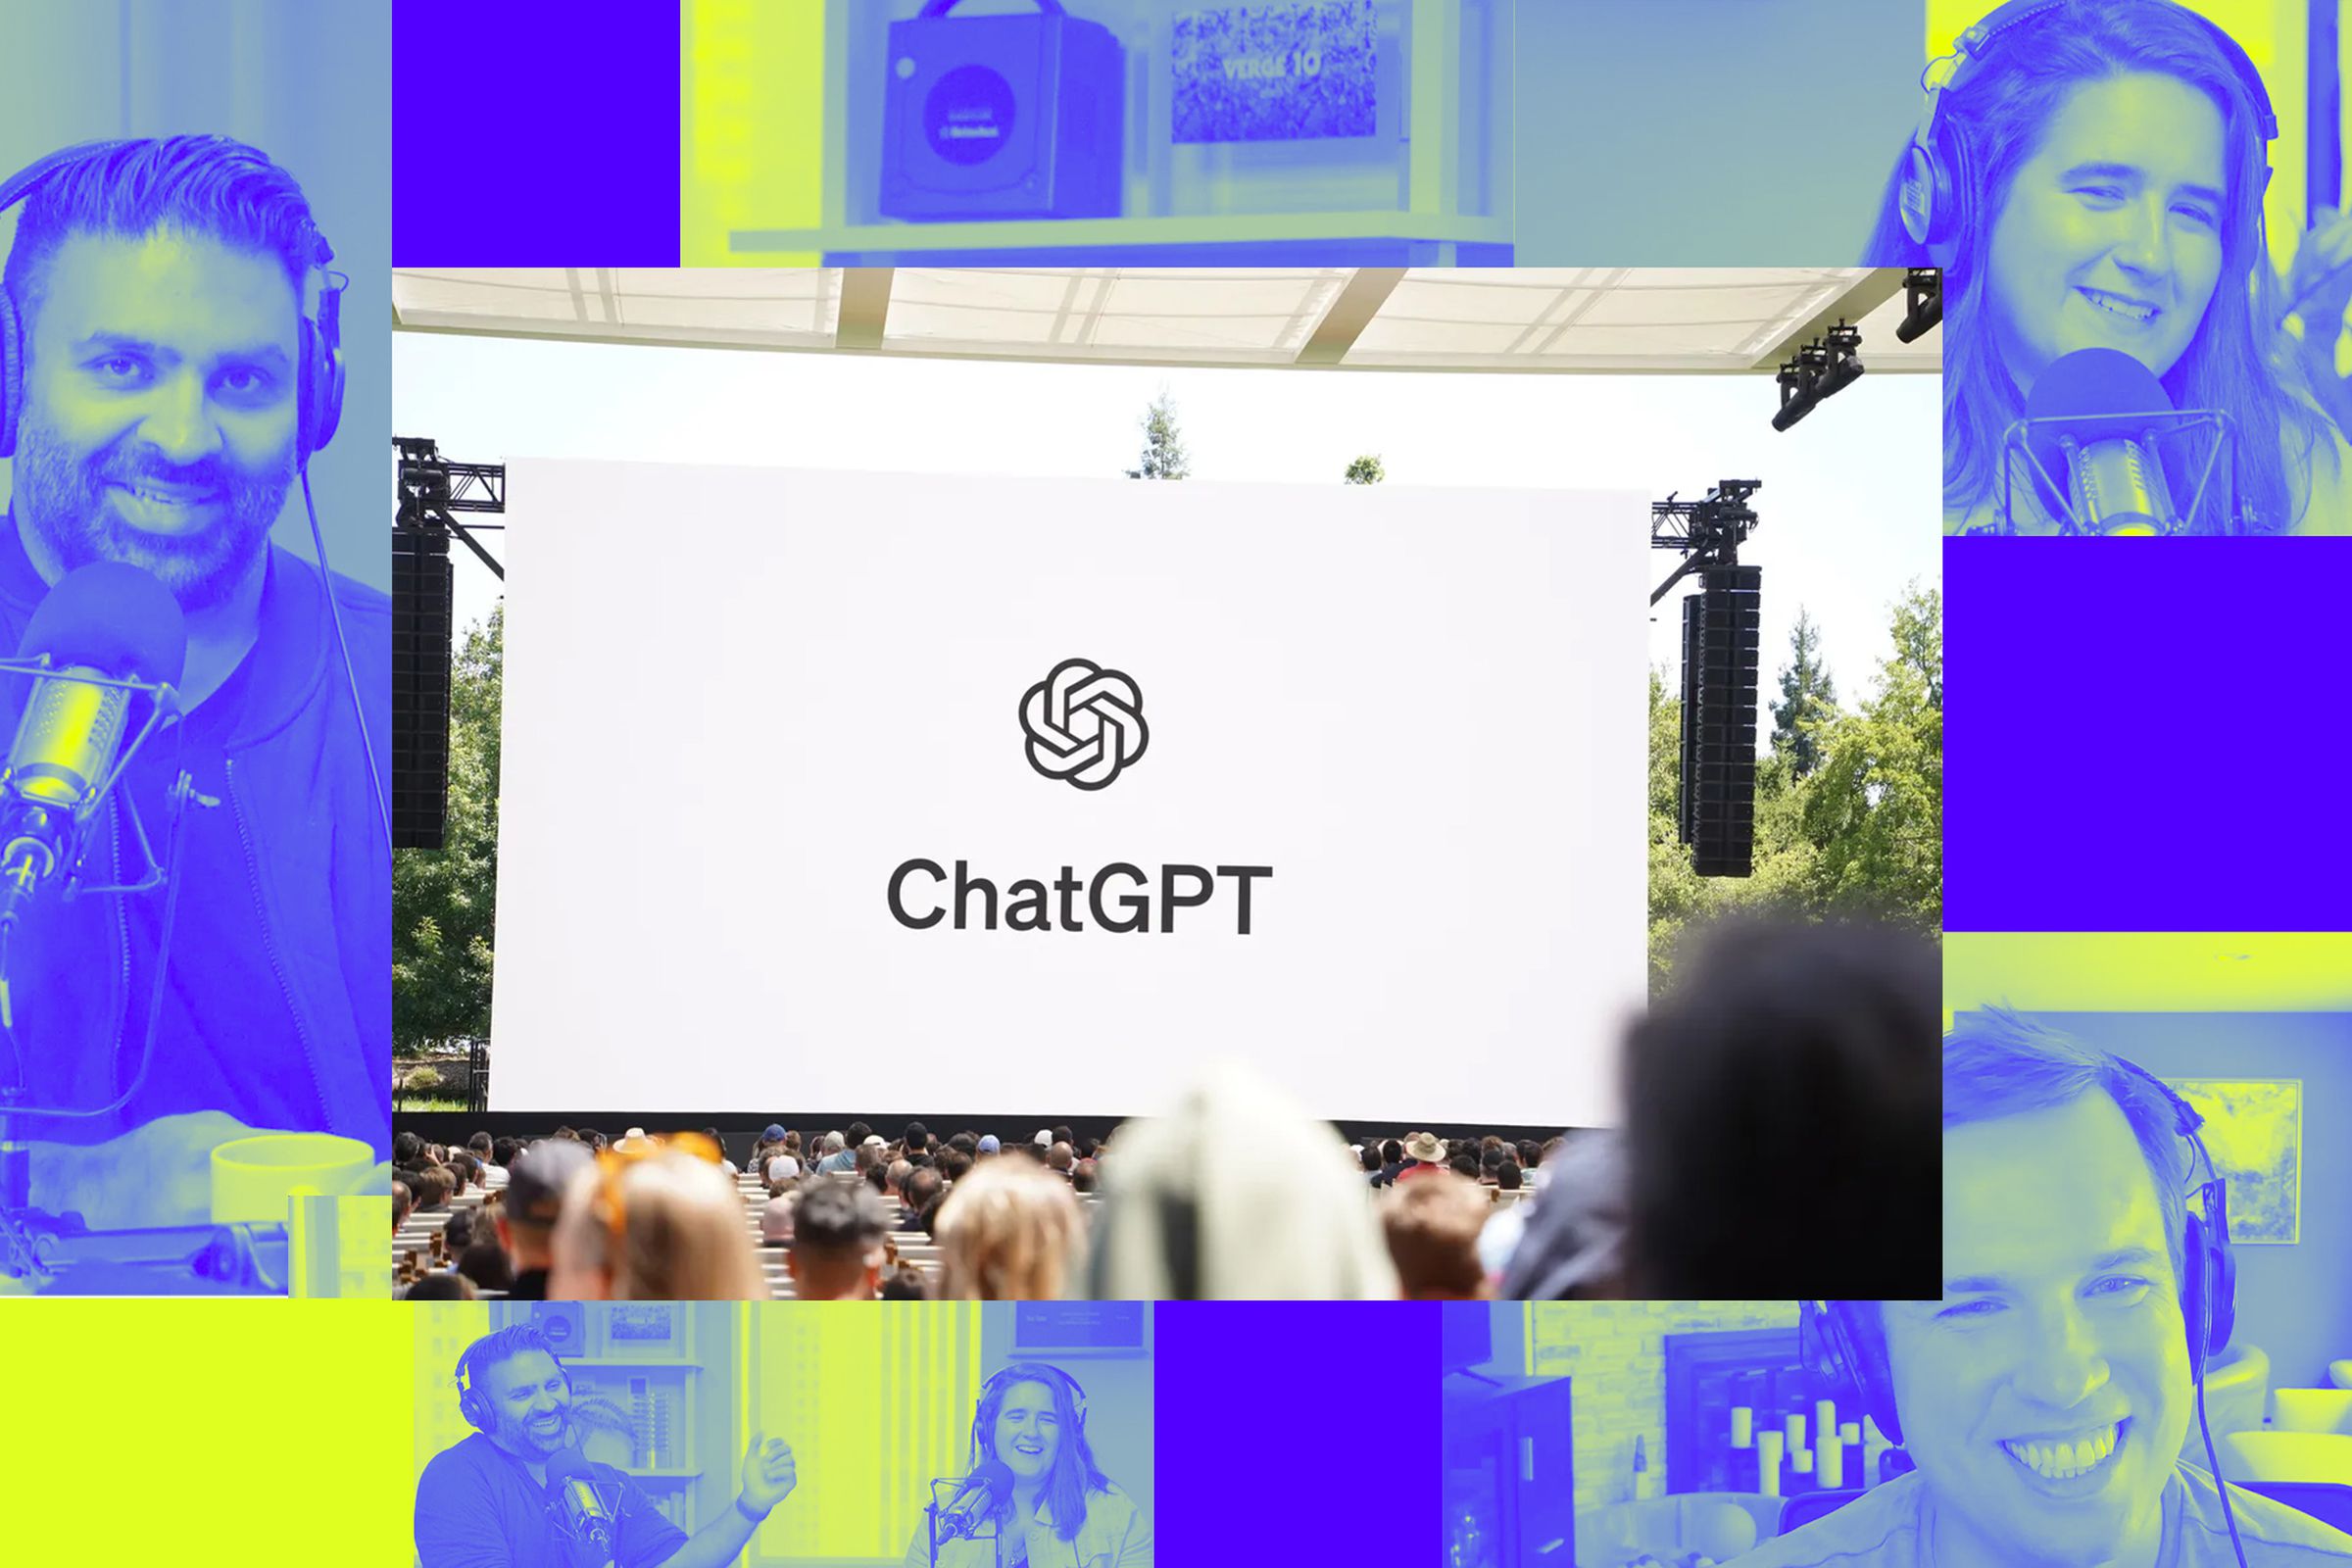 A photo of the ChatGPT logo over a Vergecast illustration.